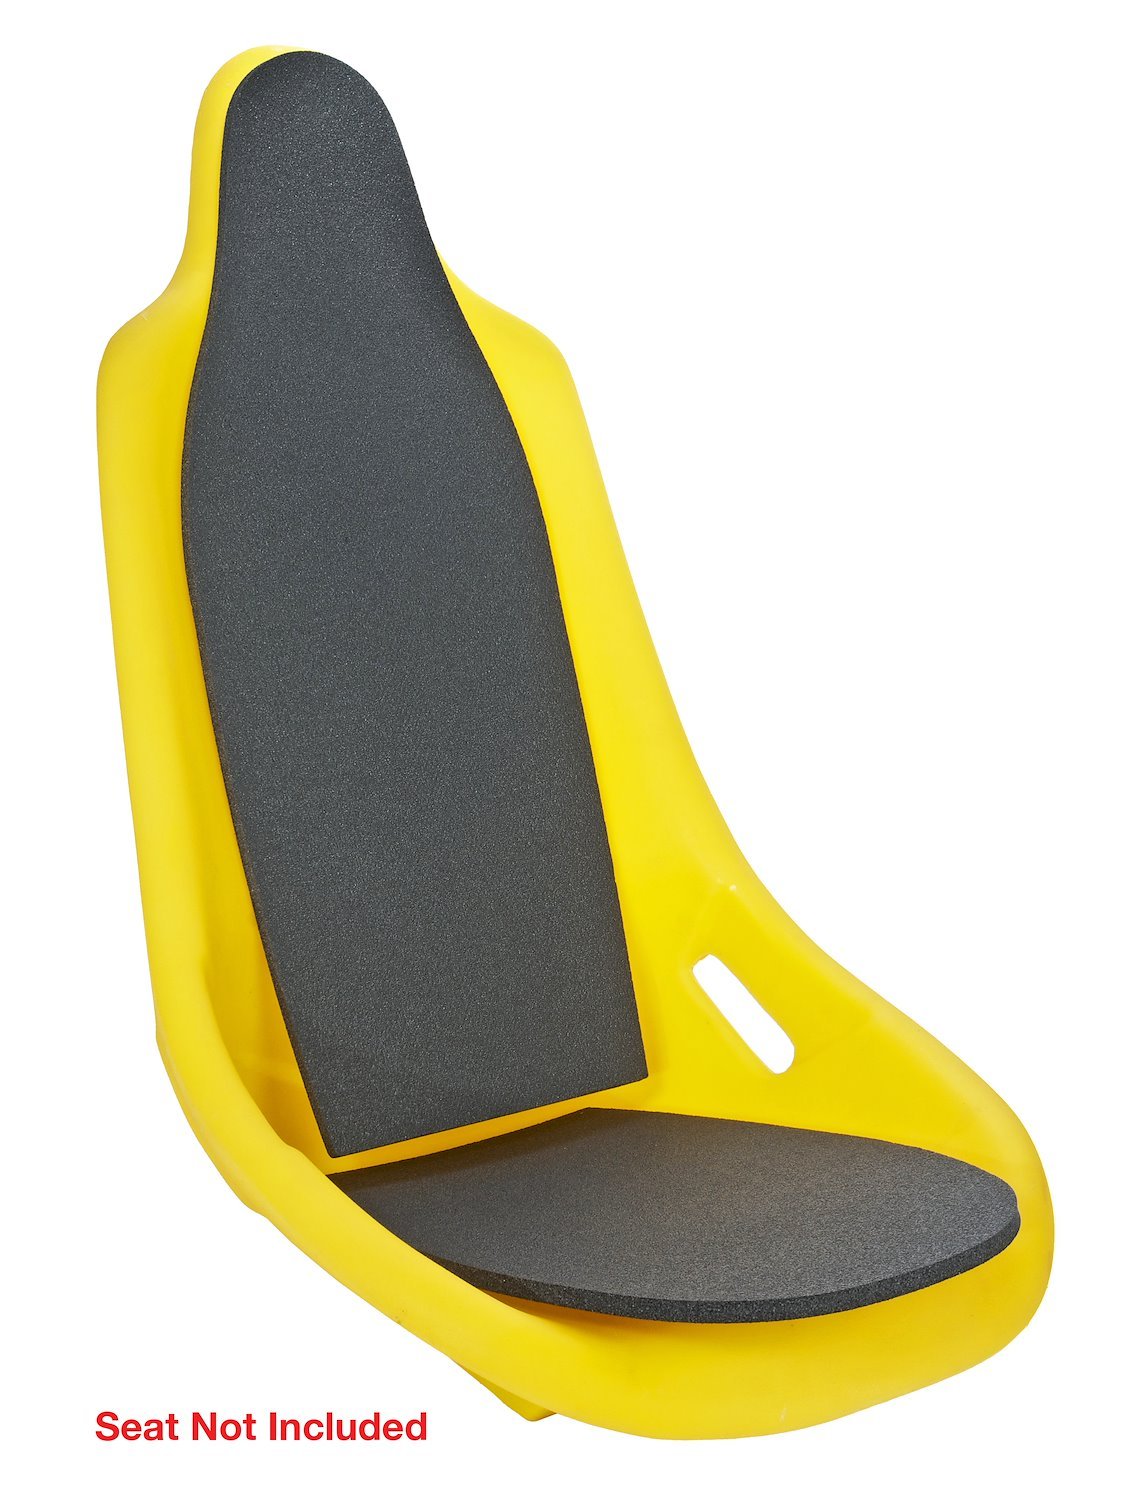 Pre-Cut Seat Pads For JEGS Pro High Back & Pro High Back II Seats Also Fits Most Other Similar Seats